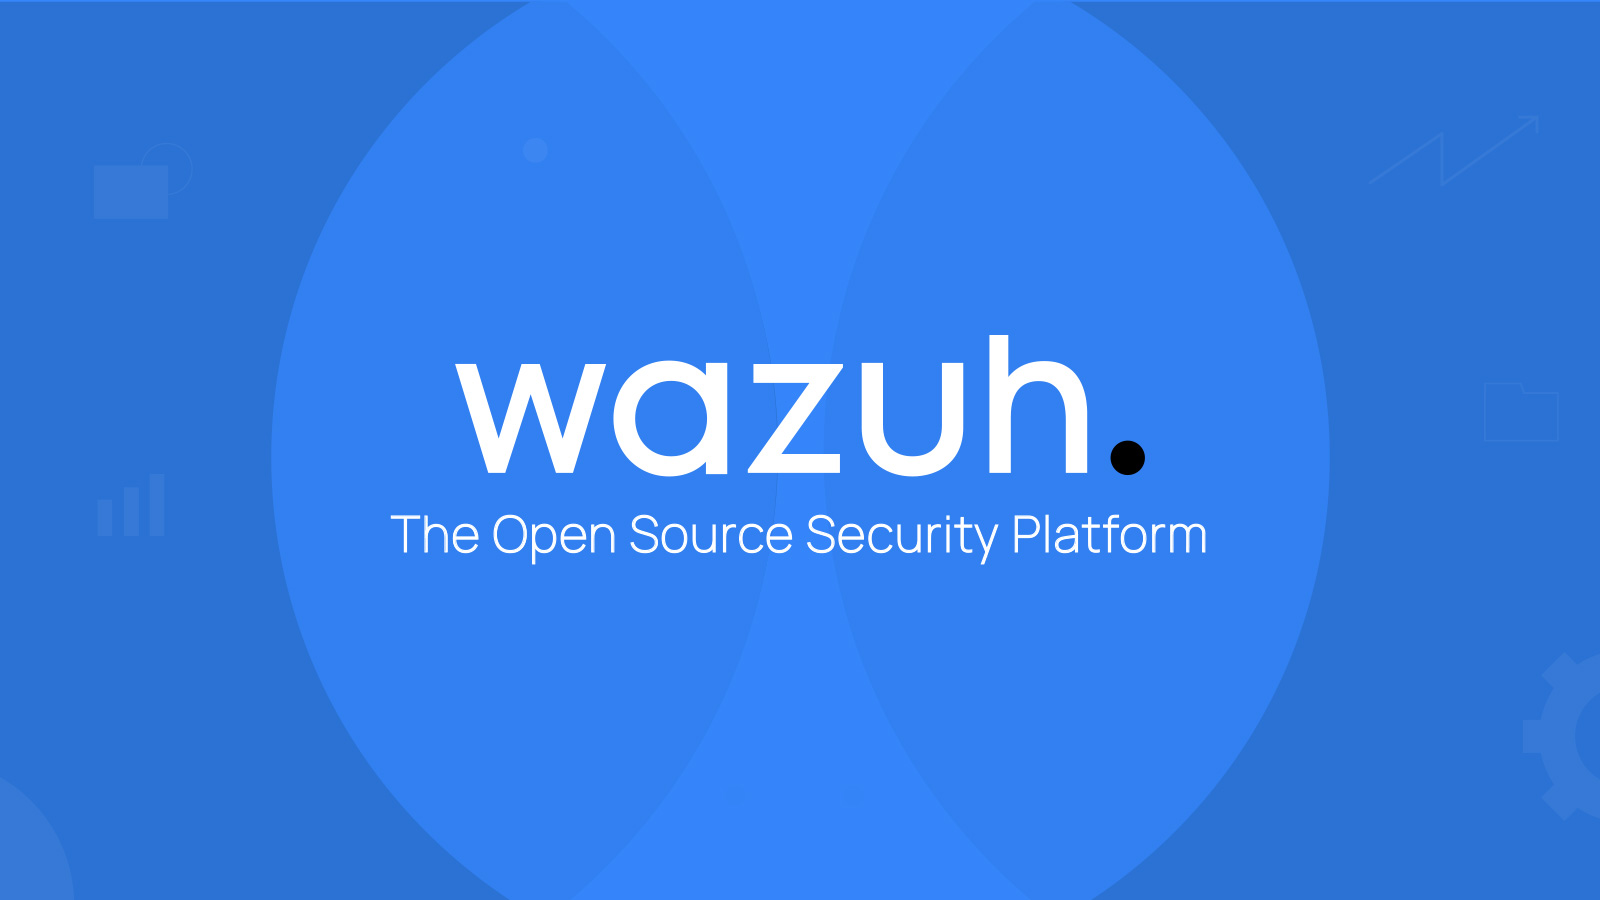 Enhancing Security Operations Using Wazuh: Open Source XDR and SIEM